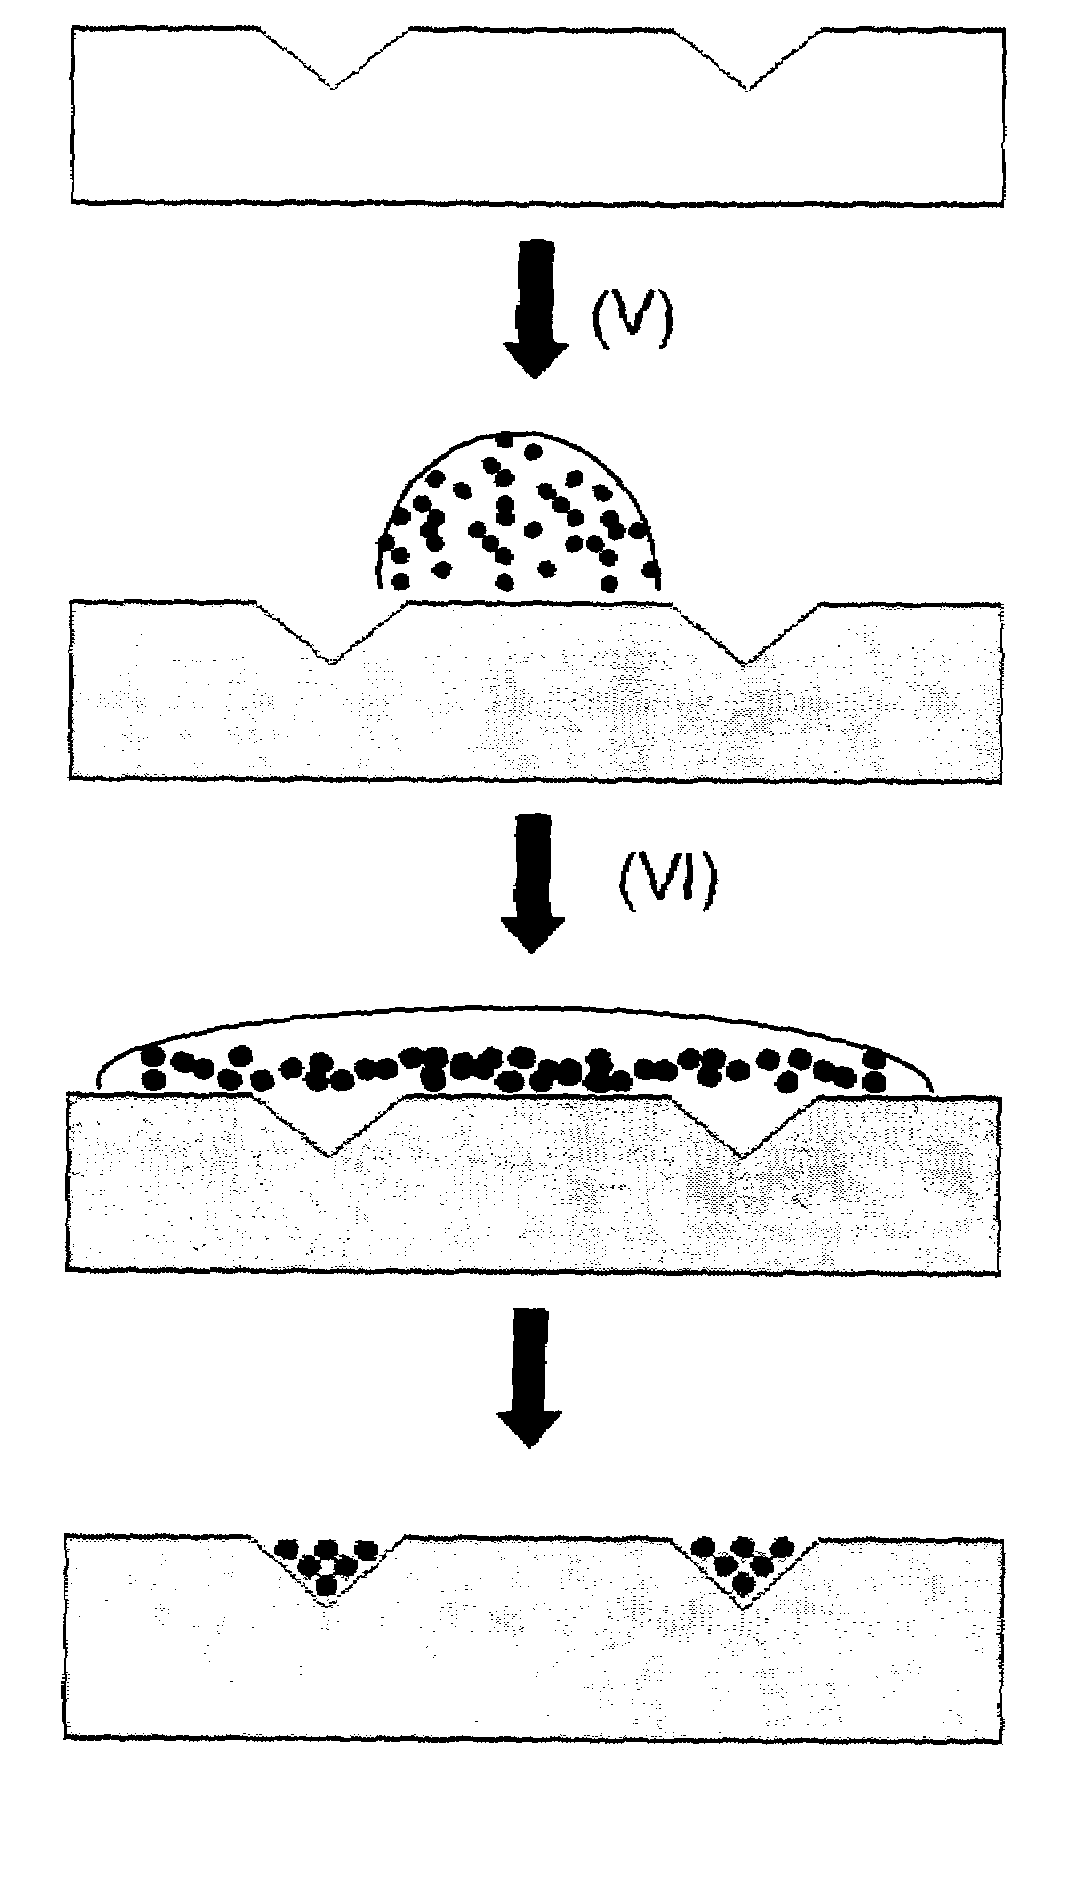 Method of self-assembly and optical applications of crystalline colloidal patterns on substrates